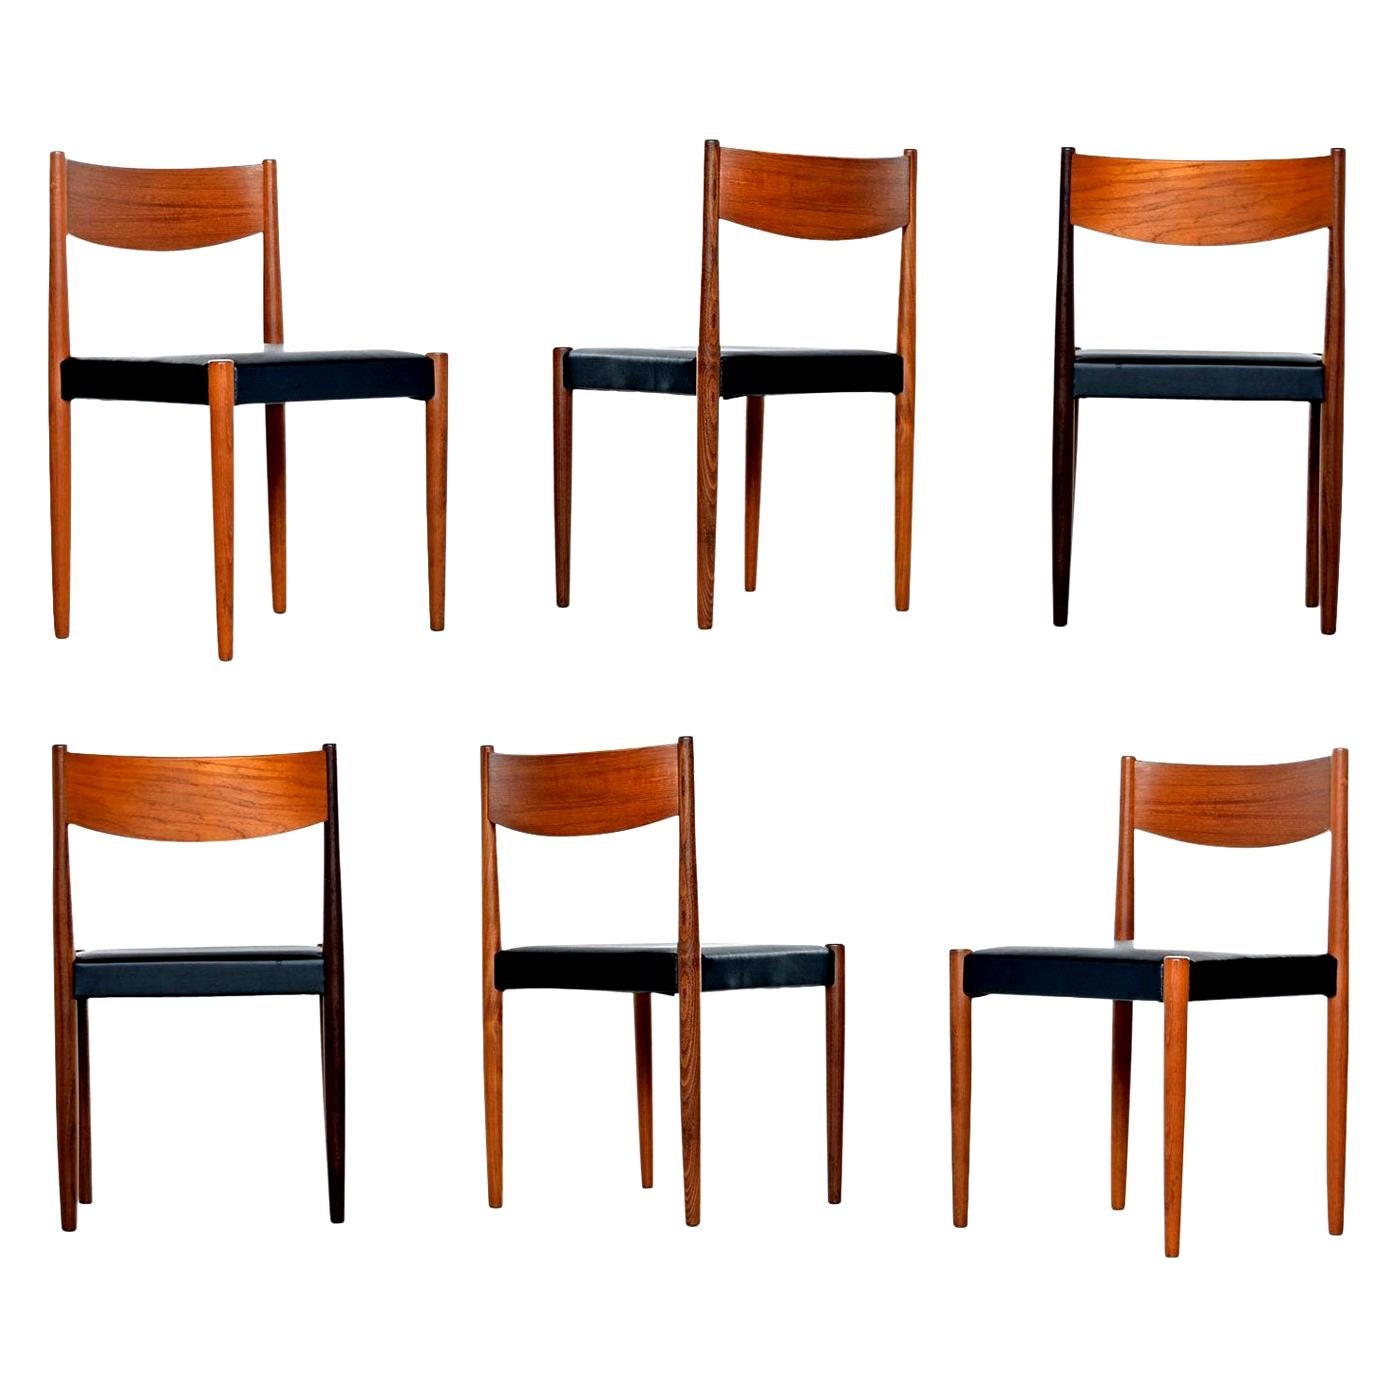 Danish Modern Rosewood and Teak Dining Chairs in New Black Vinyl Upholstery